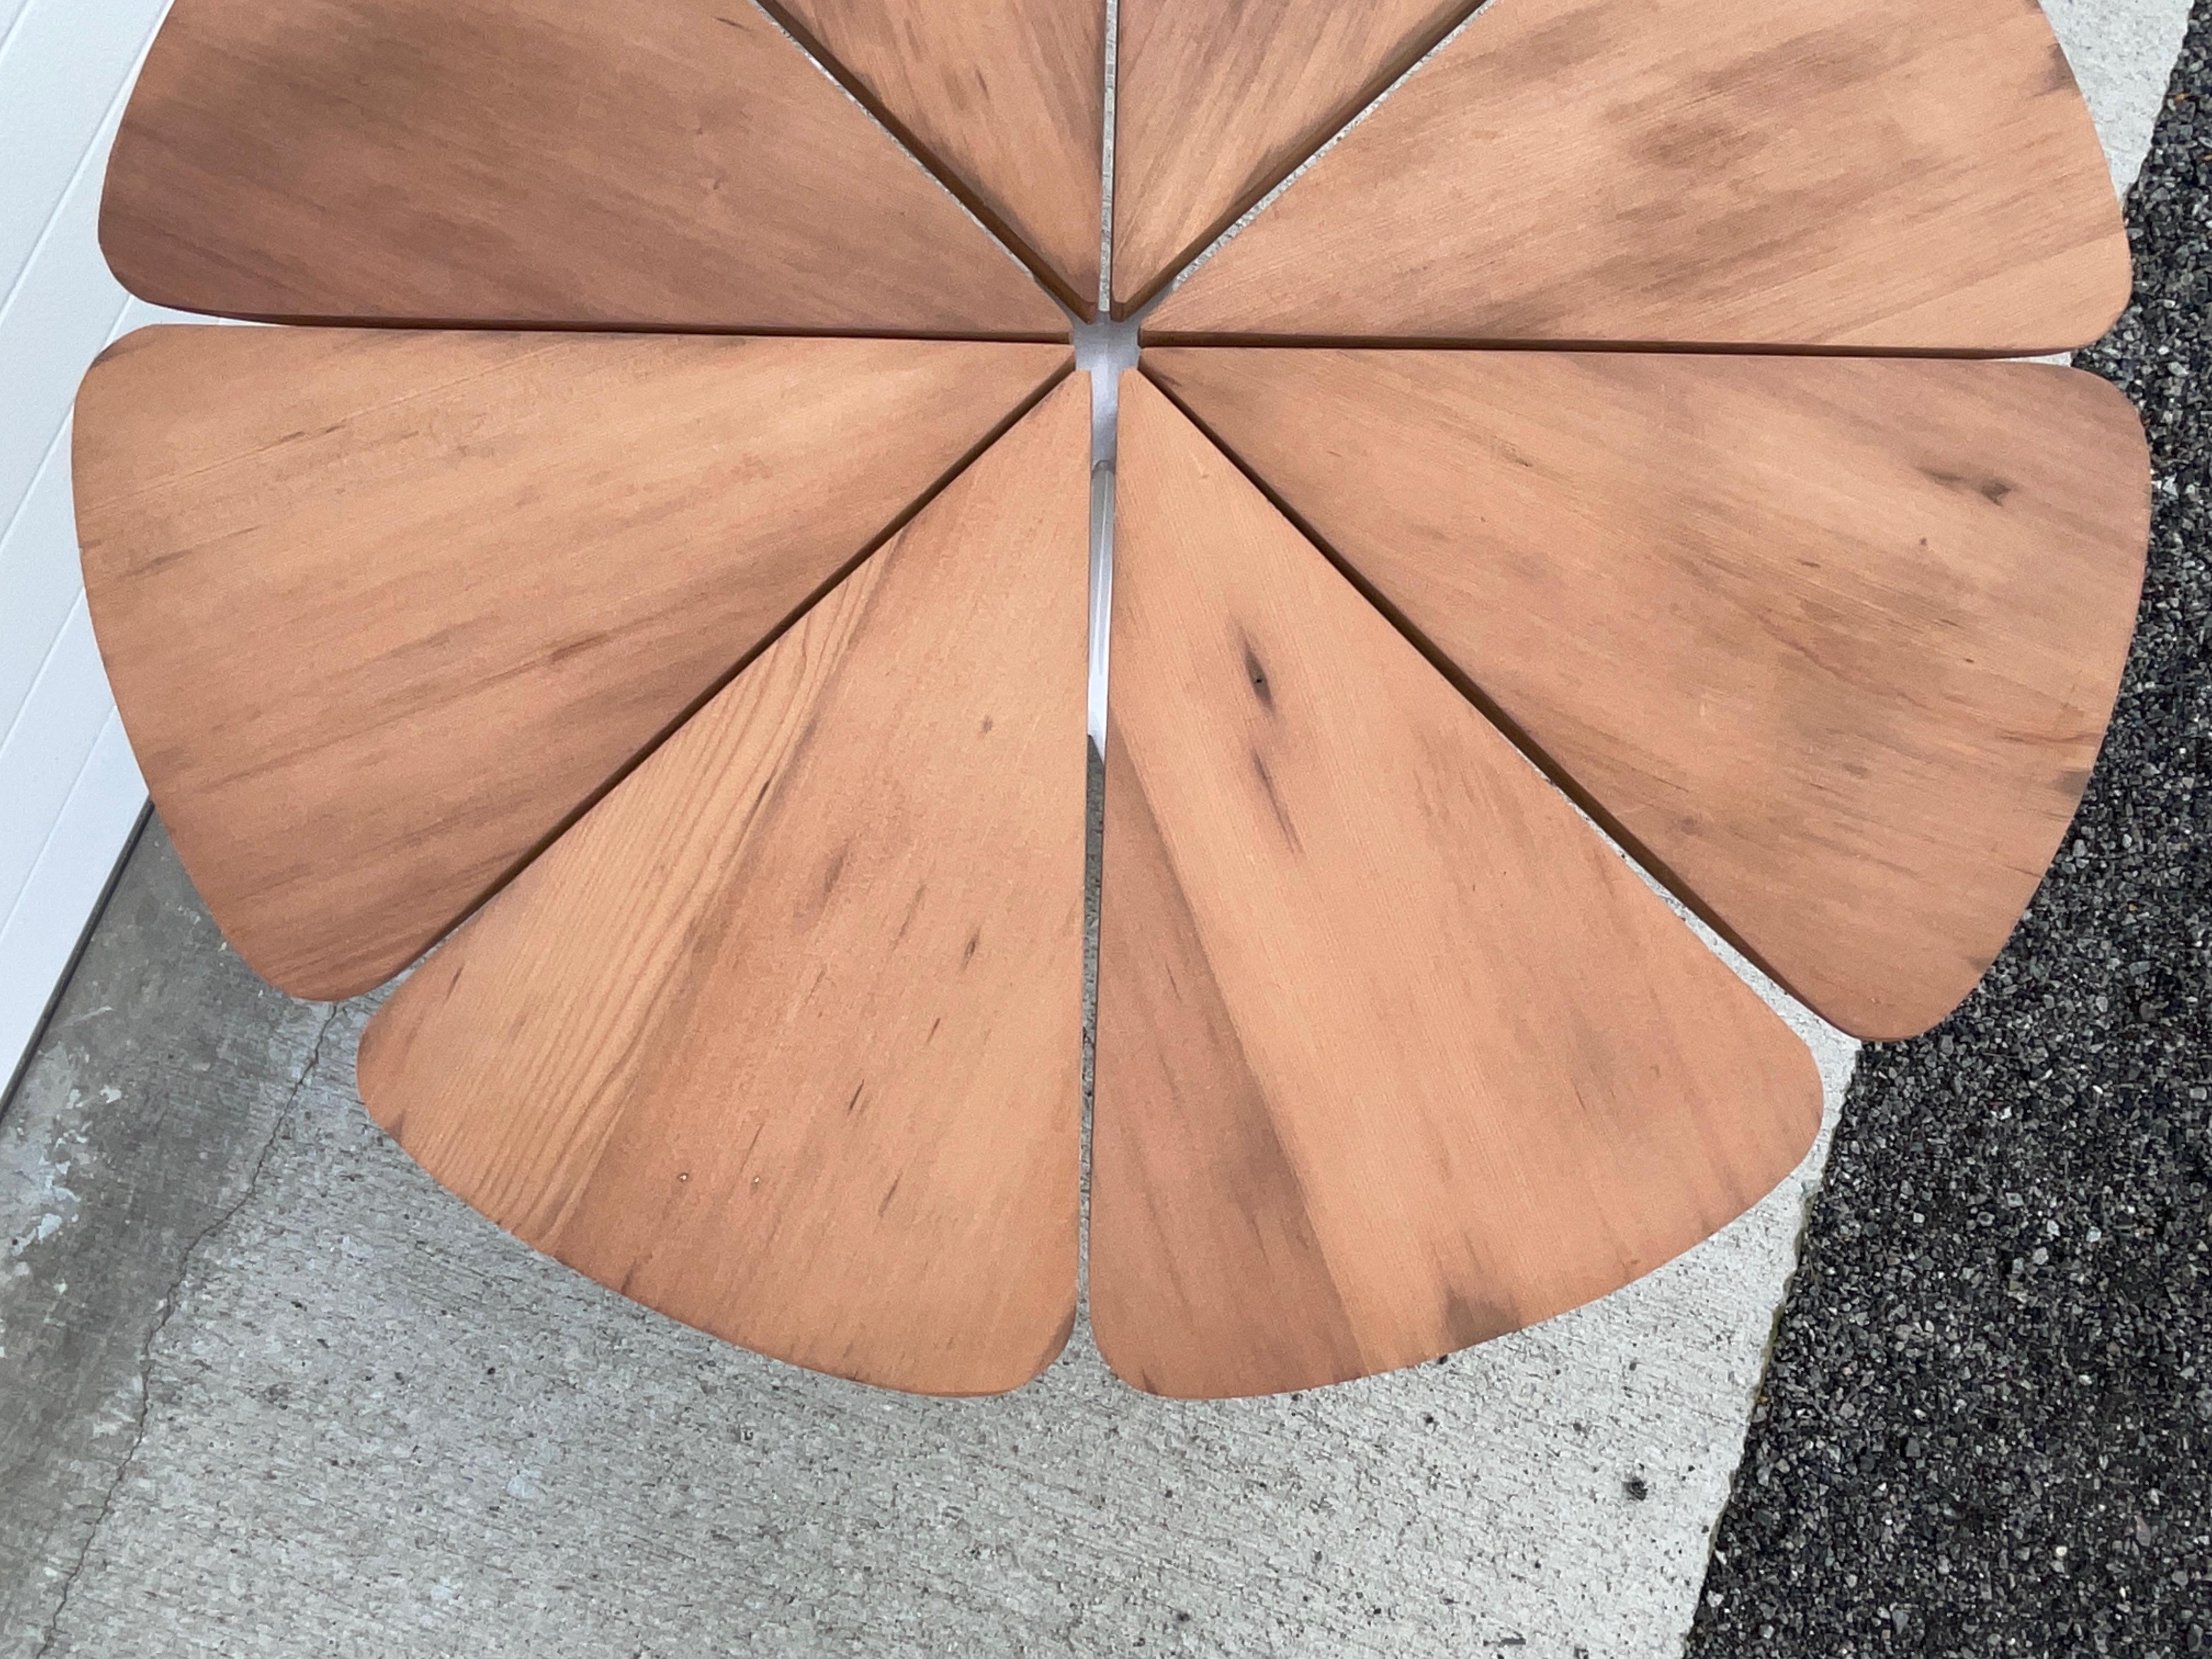 Powder-Coated 1961 Petal Dining Table by Richard Schultz for Knoll in California Redwood For Sale